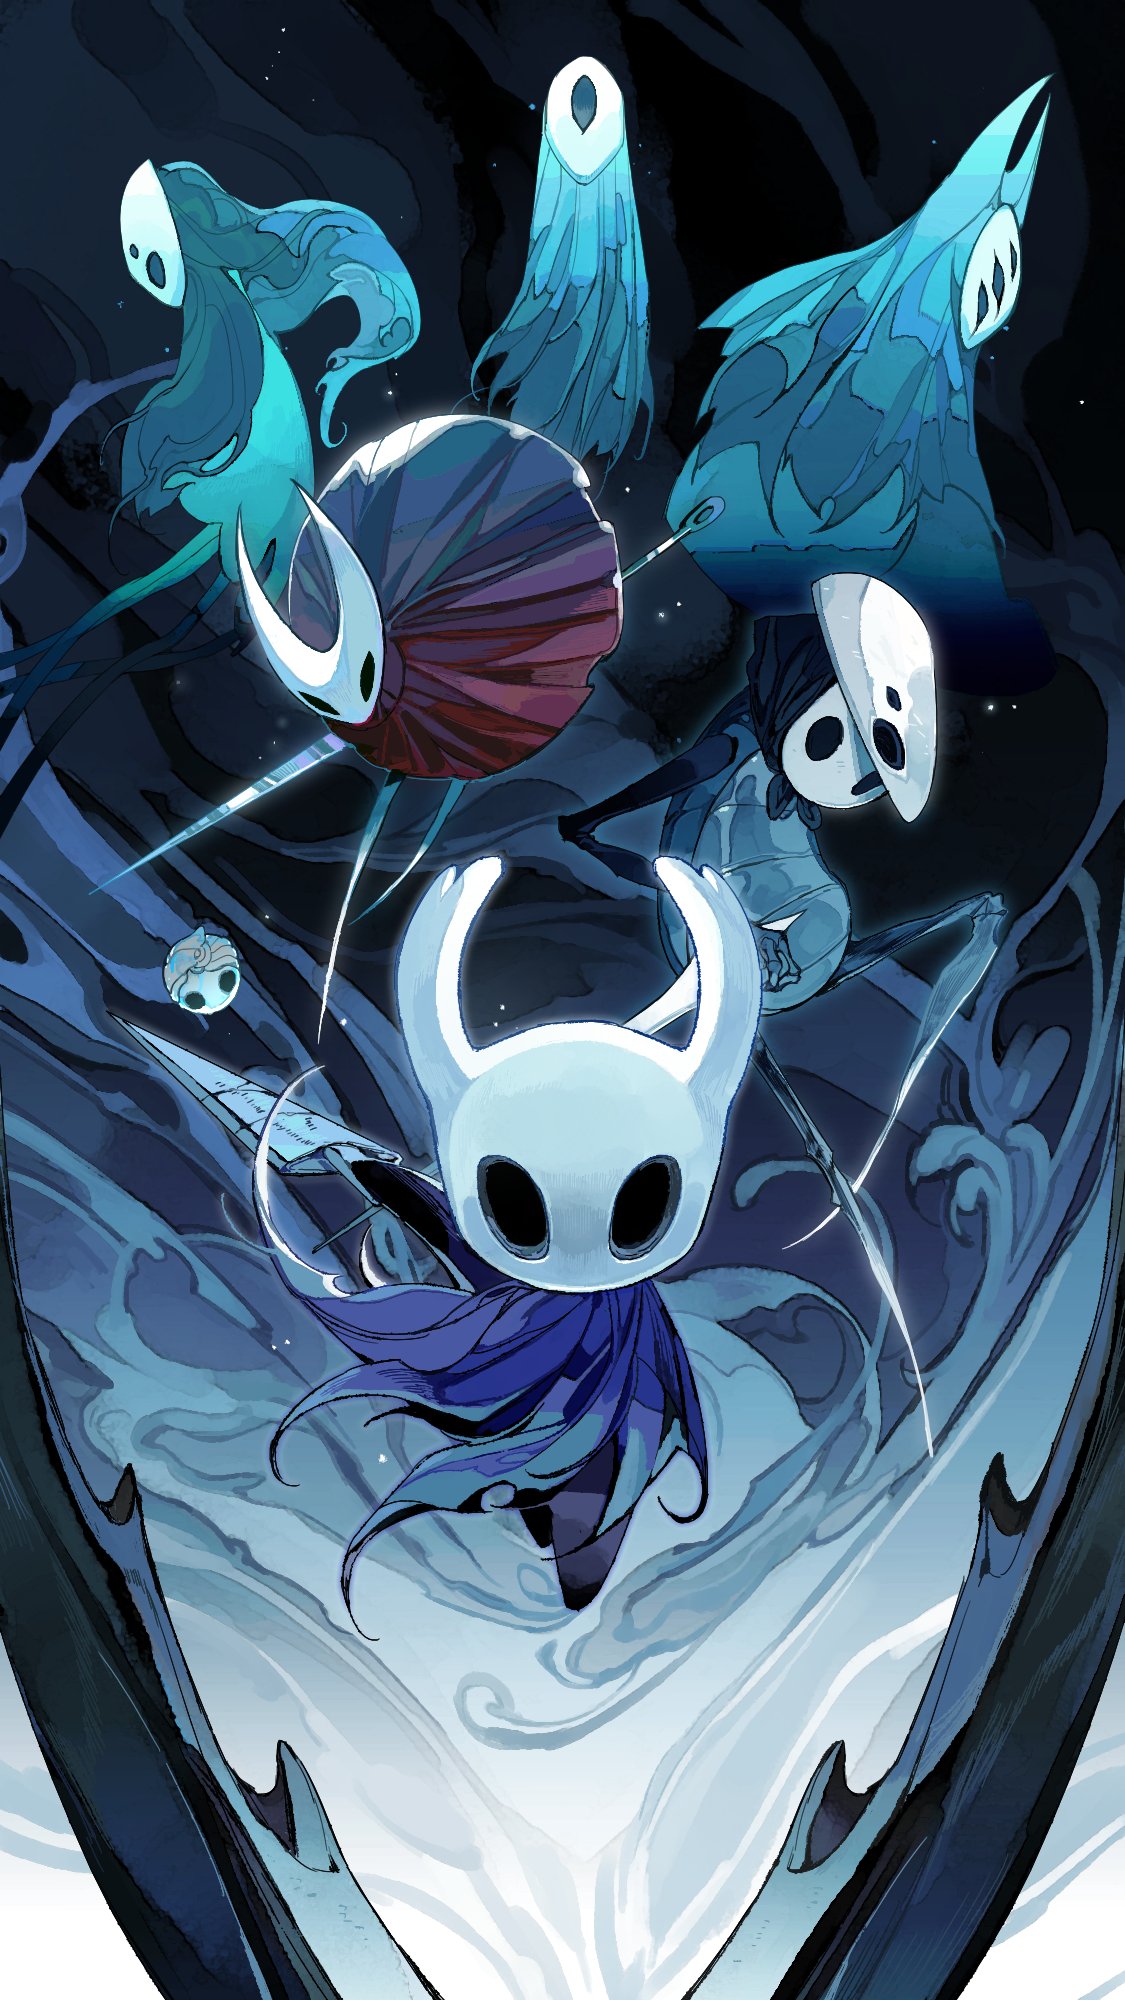 2boys 2others 3girls bug commentary commission darkdog dress floating herrah_(hollow_knight) highres holding holding_weapon hollow_knight hollow_knight_(character) hornet_(hollow_knight) knight_(hollow_knight) looking_at_viewer lurien_(hollow_knight) monomon_(hollow_knight) multiple_boys multiple_girls multiple_others nail_(hollow_knight) quirrel red_dress weapon white_mask